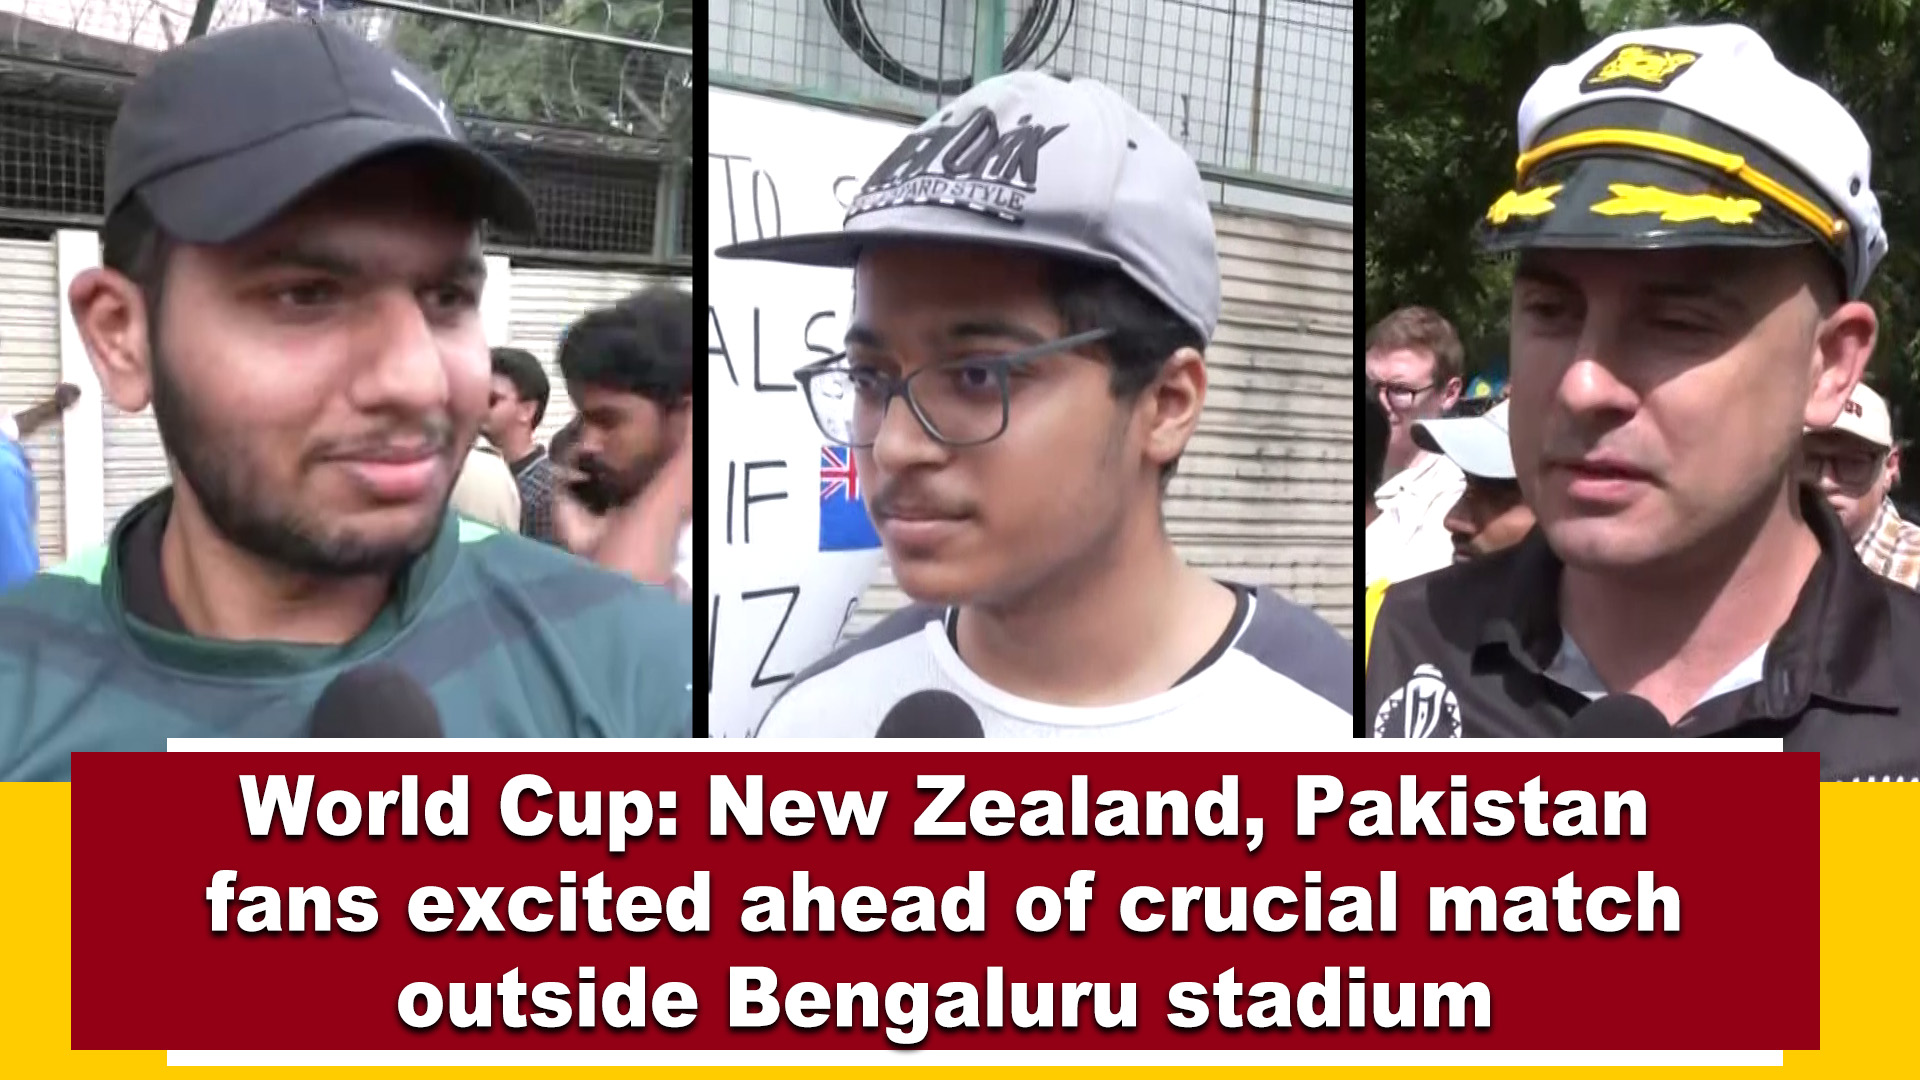 World Cup: New Zealand, Pakistan fans excited ahead of crucial match outside Bengaluru stadium